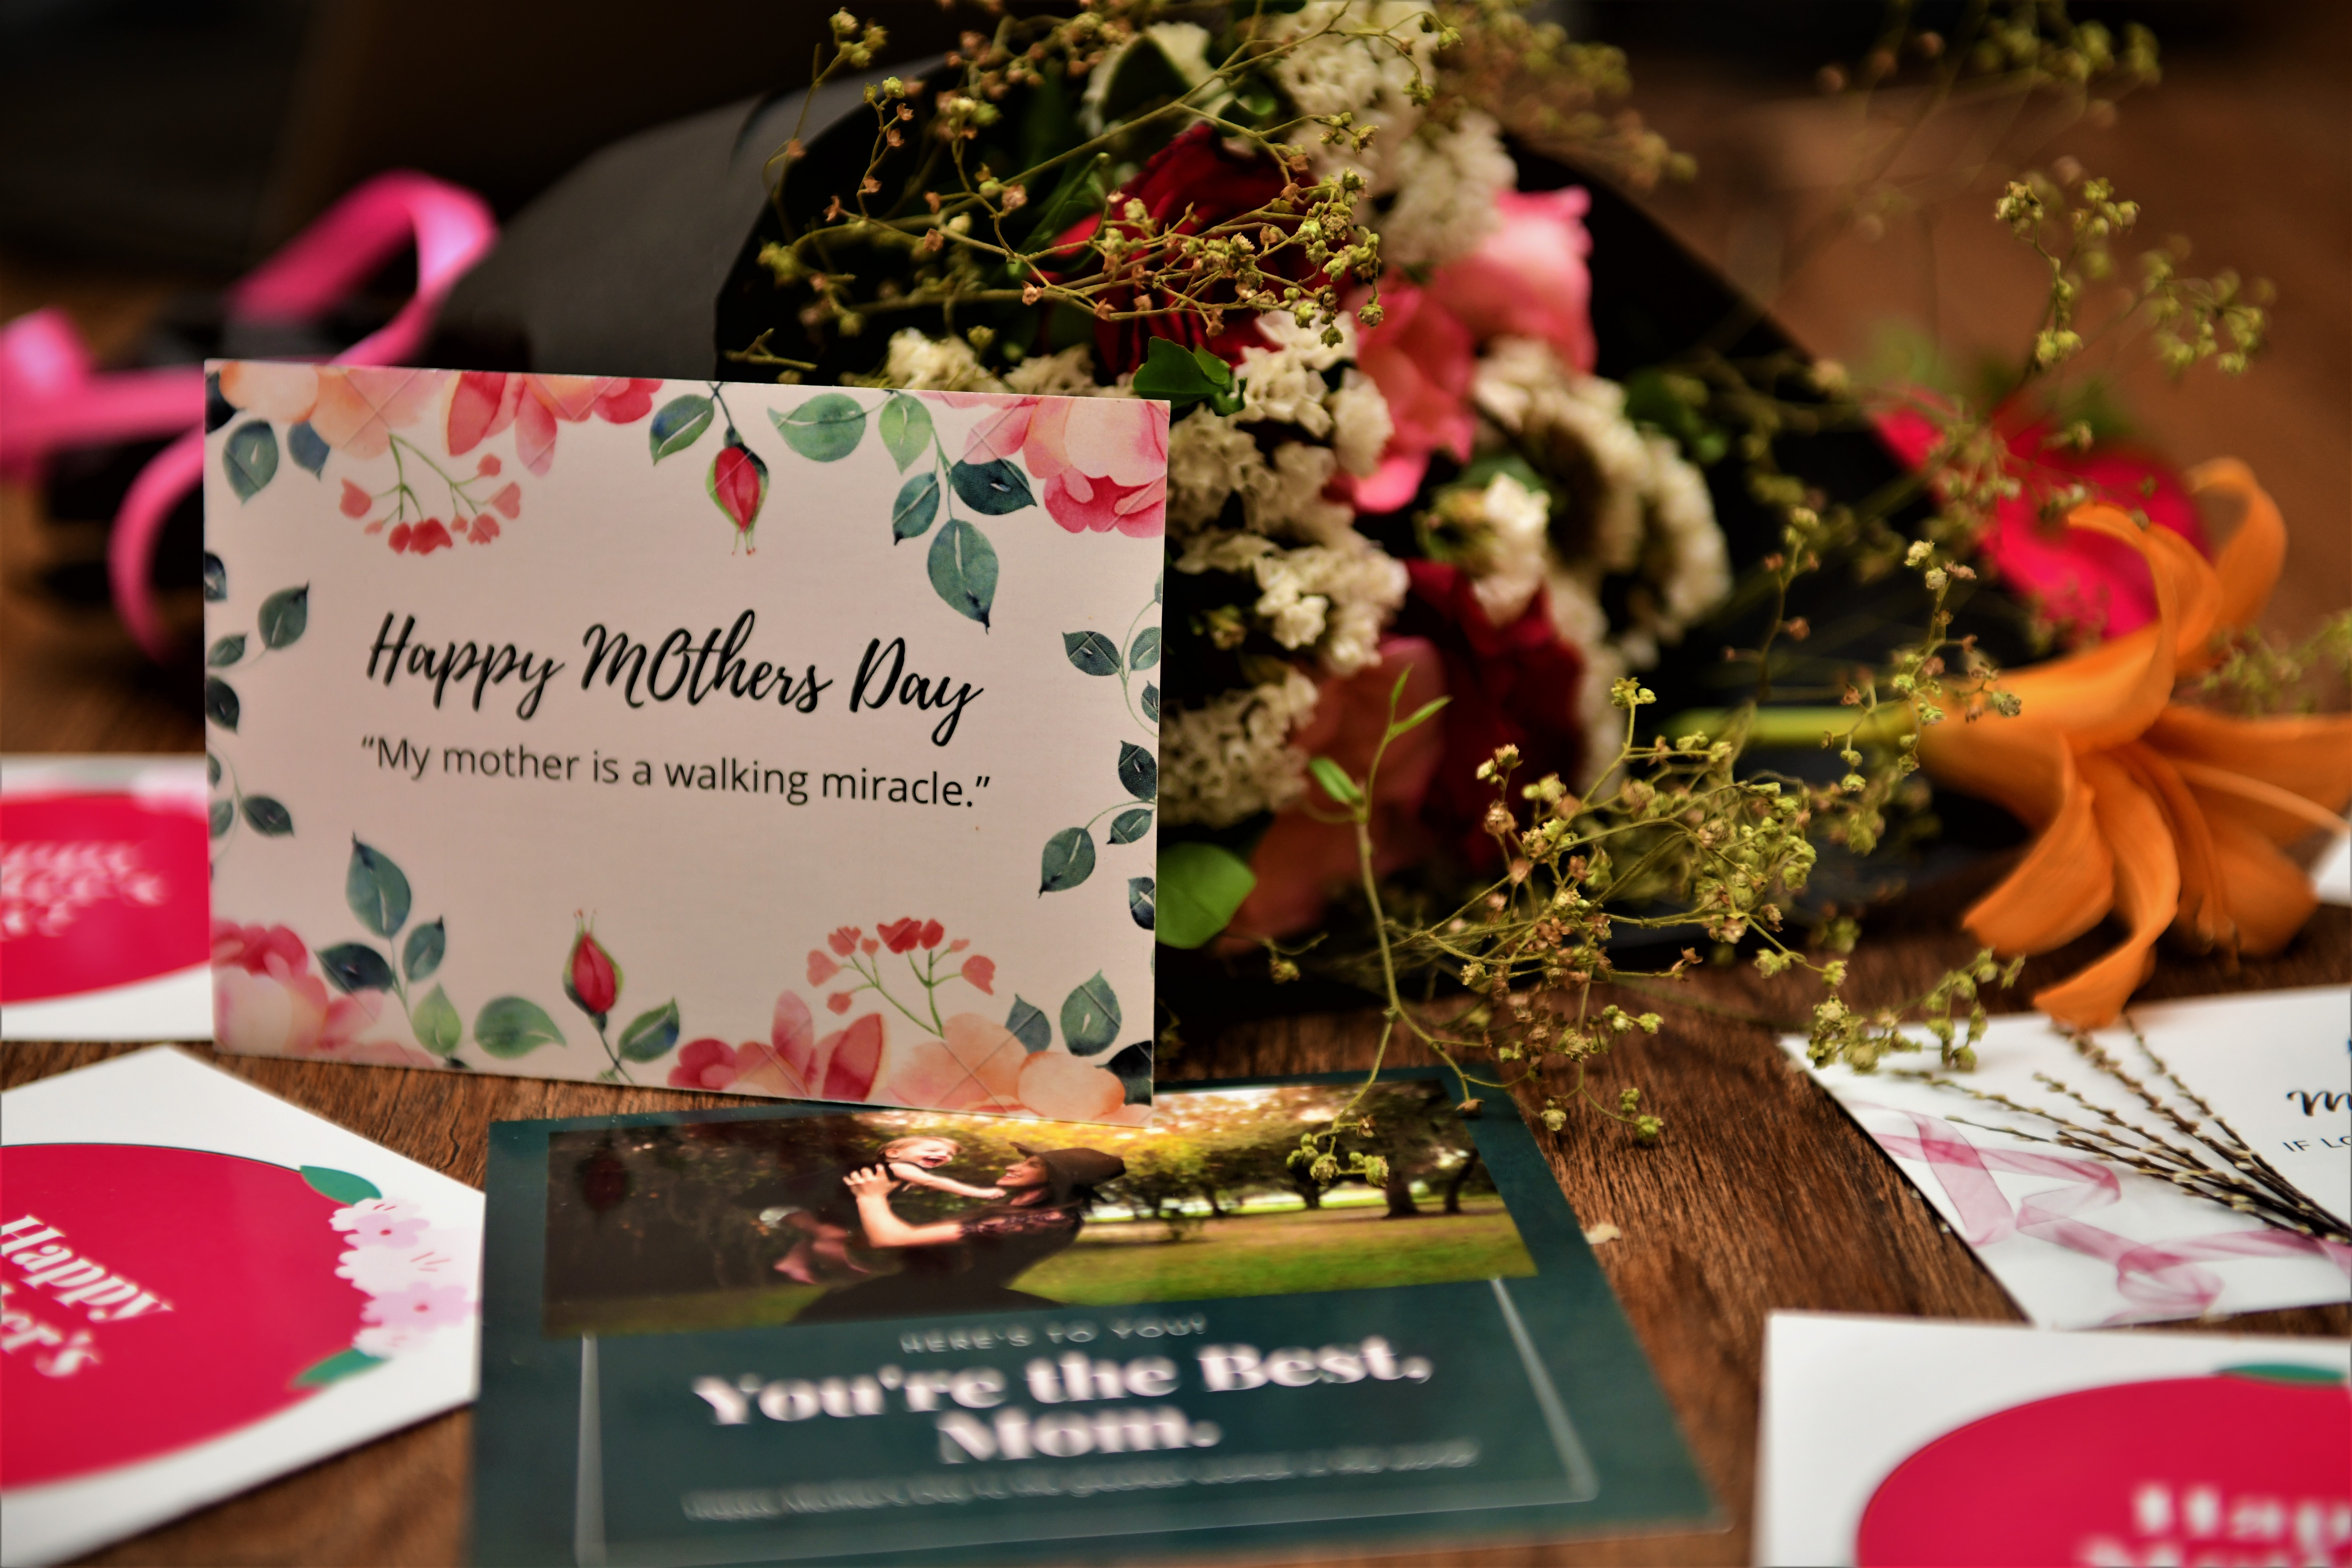 Card saying 'Happy Mother's Day' and flowers on a table